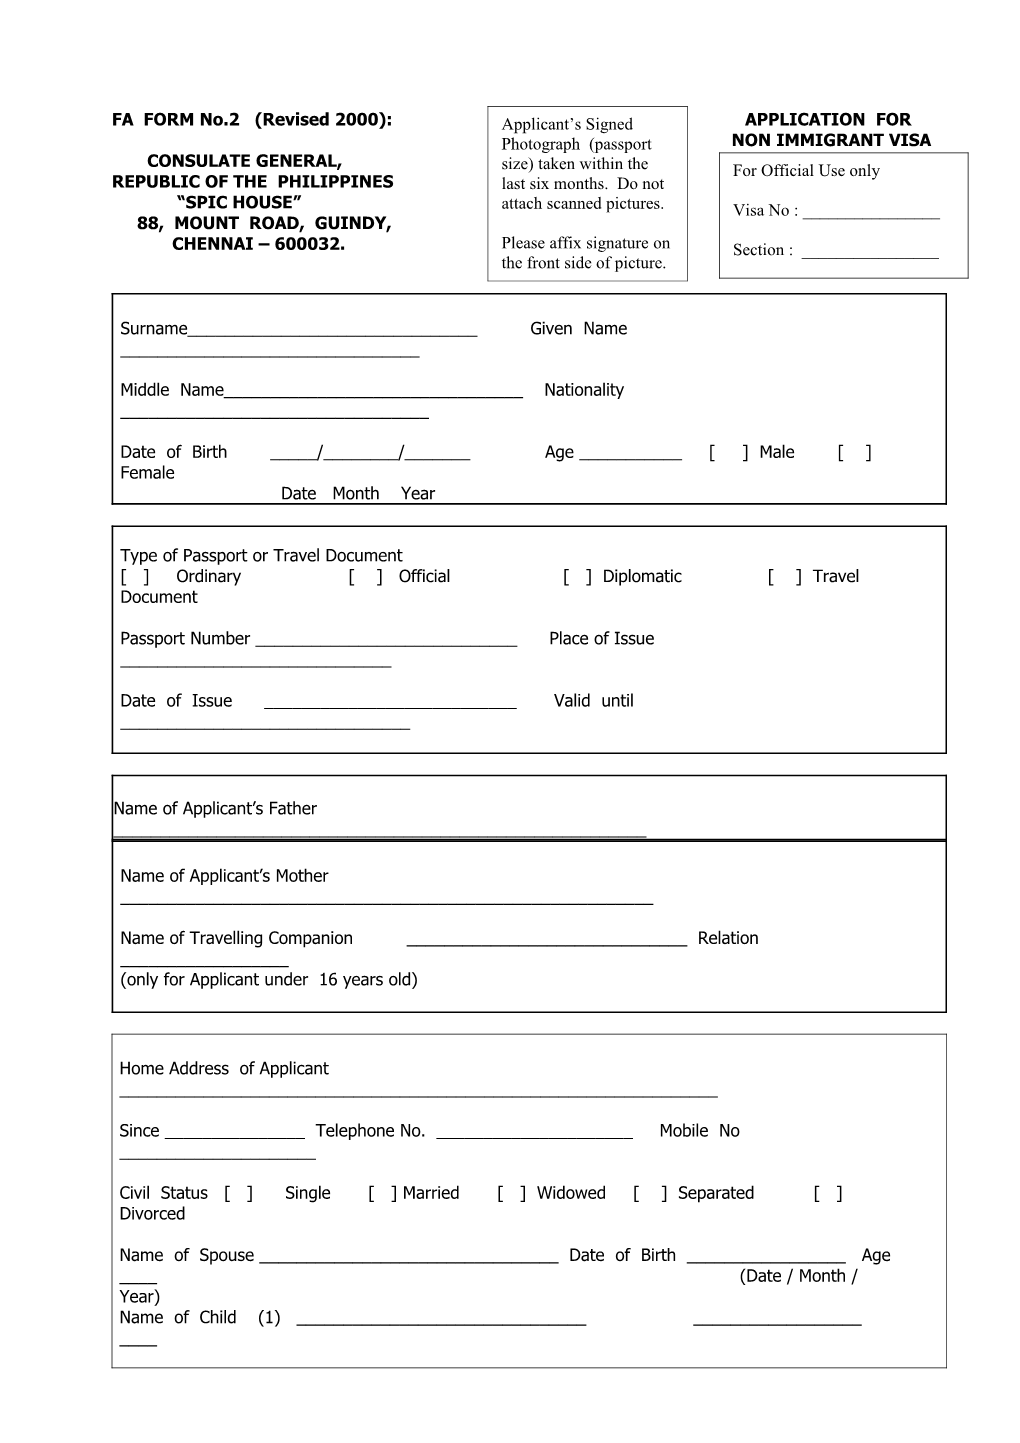 FA FORM No.2 (Revised 2000): APPLICATION FOR